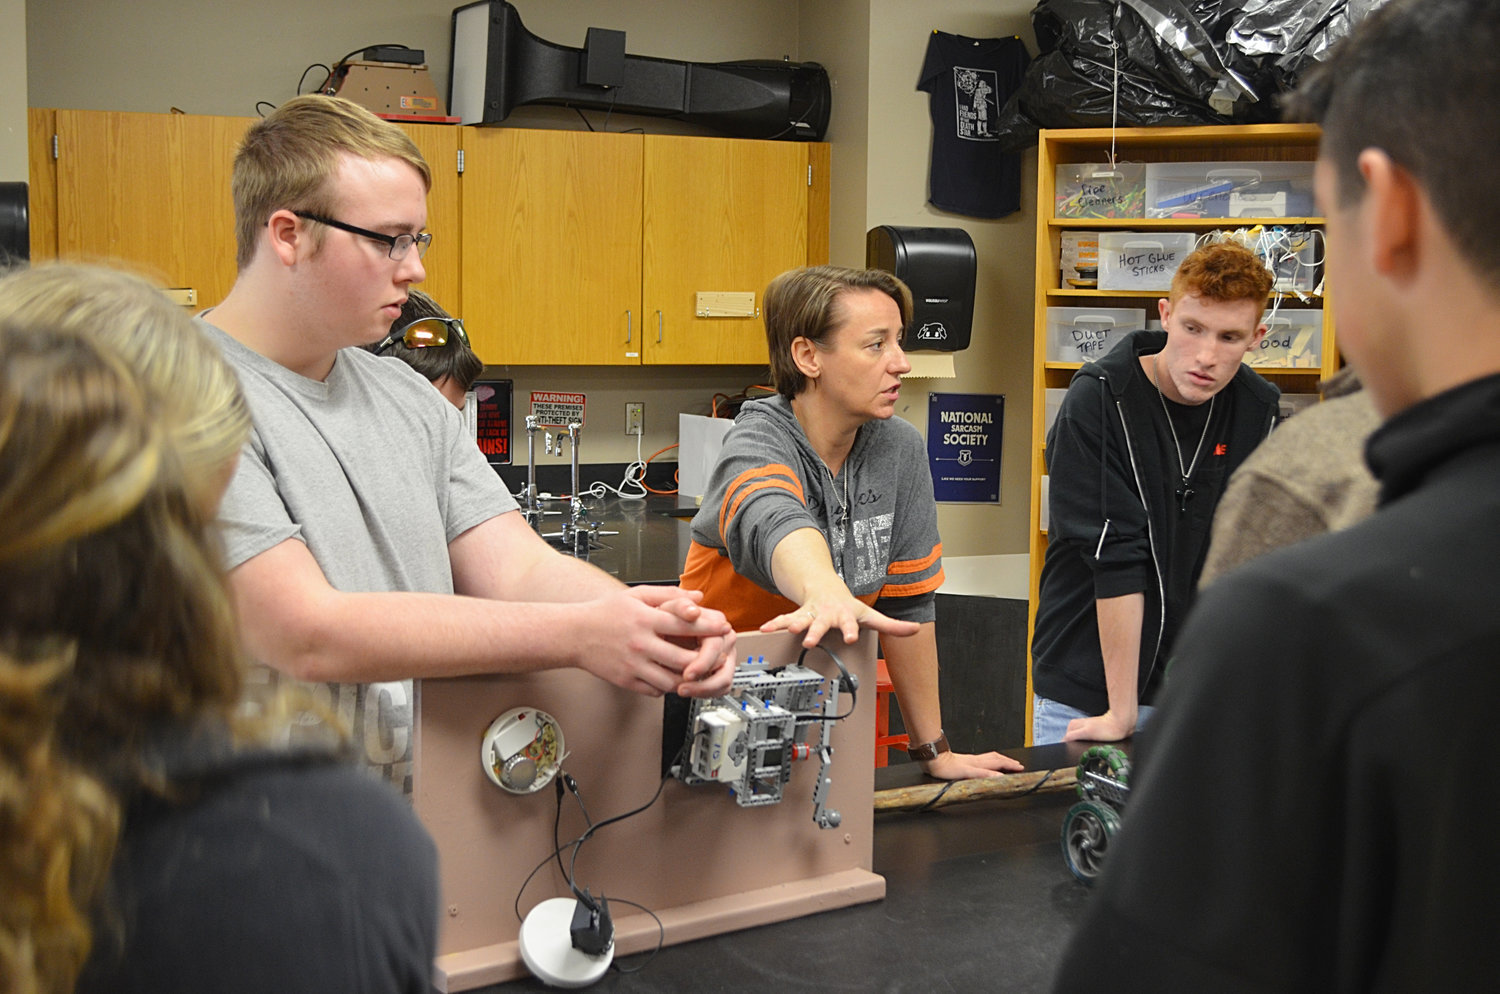 High school student Matthew Carder, left, teacher Deborah Armstrong, middle, and high school student Tanner Taylor tell eighth-graders about a project in a technology and engineering classroom.